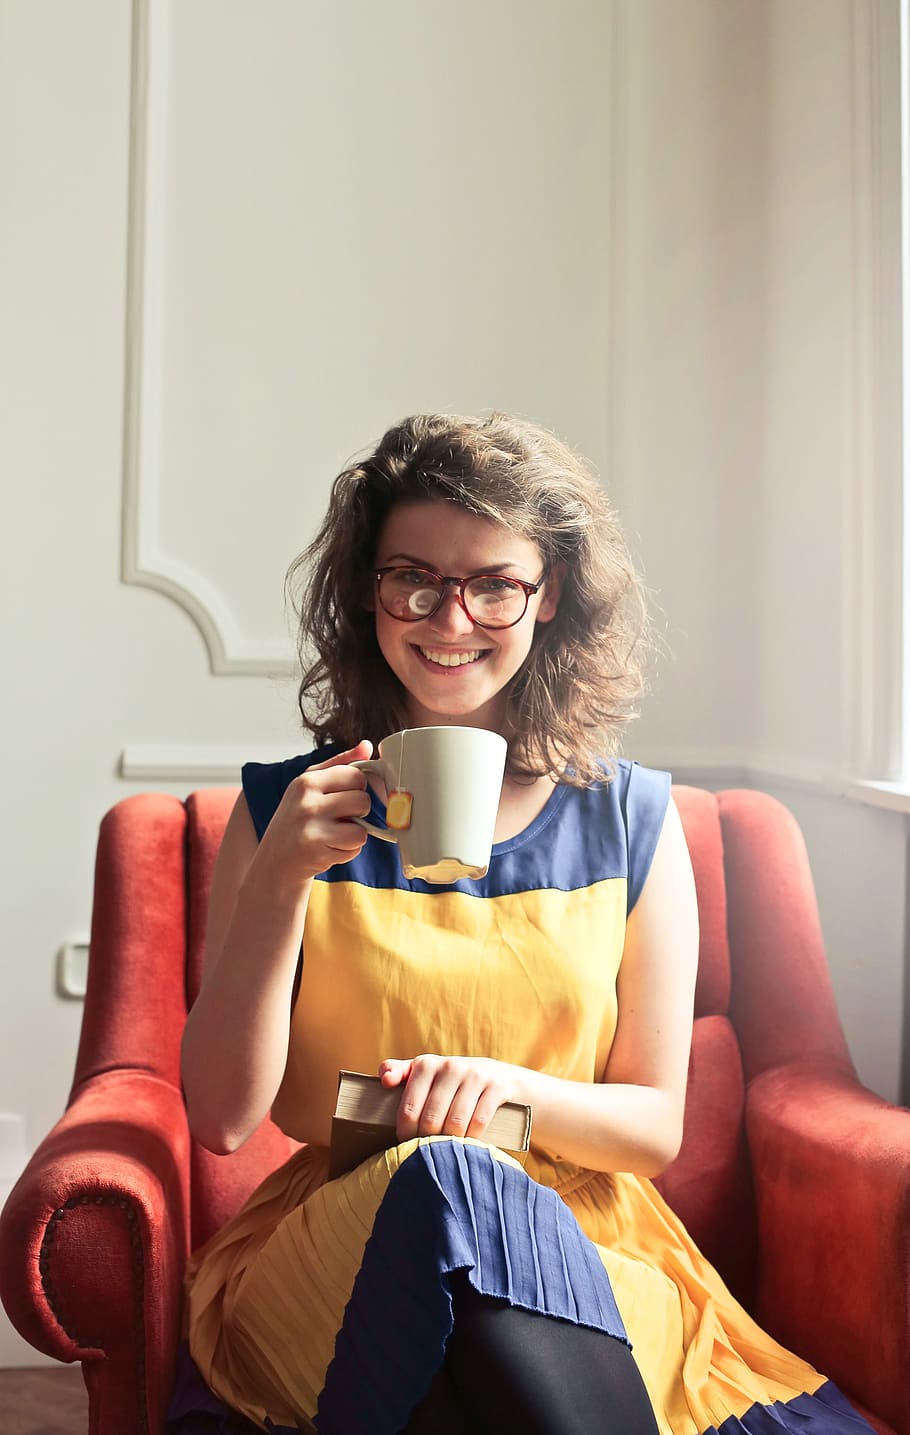 Young Woman Wearing Yellow And Blue Dress With Spectacles, And Holding A Book While Enjoying A Cup Of Tea At Home